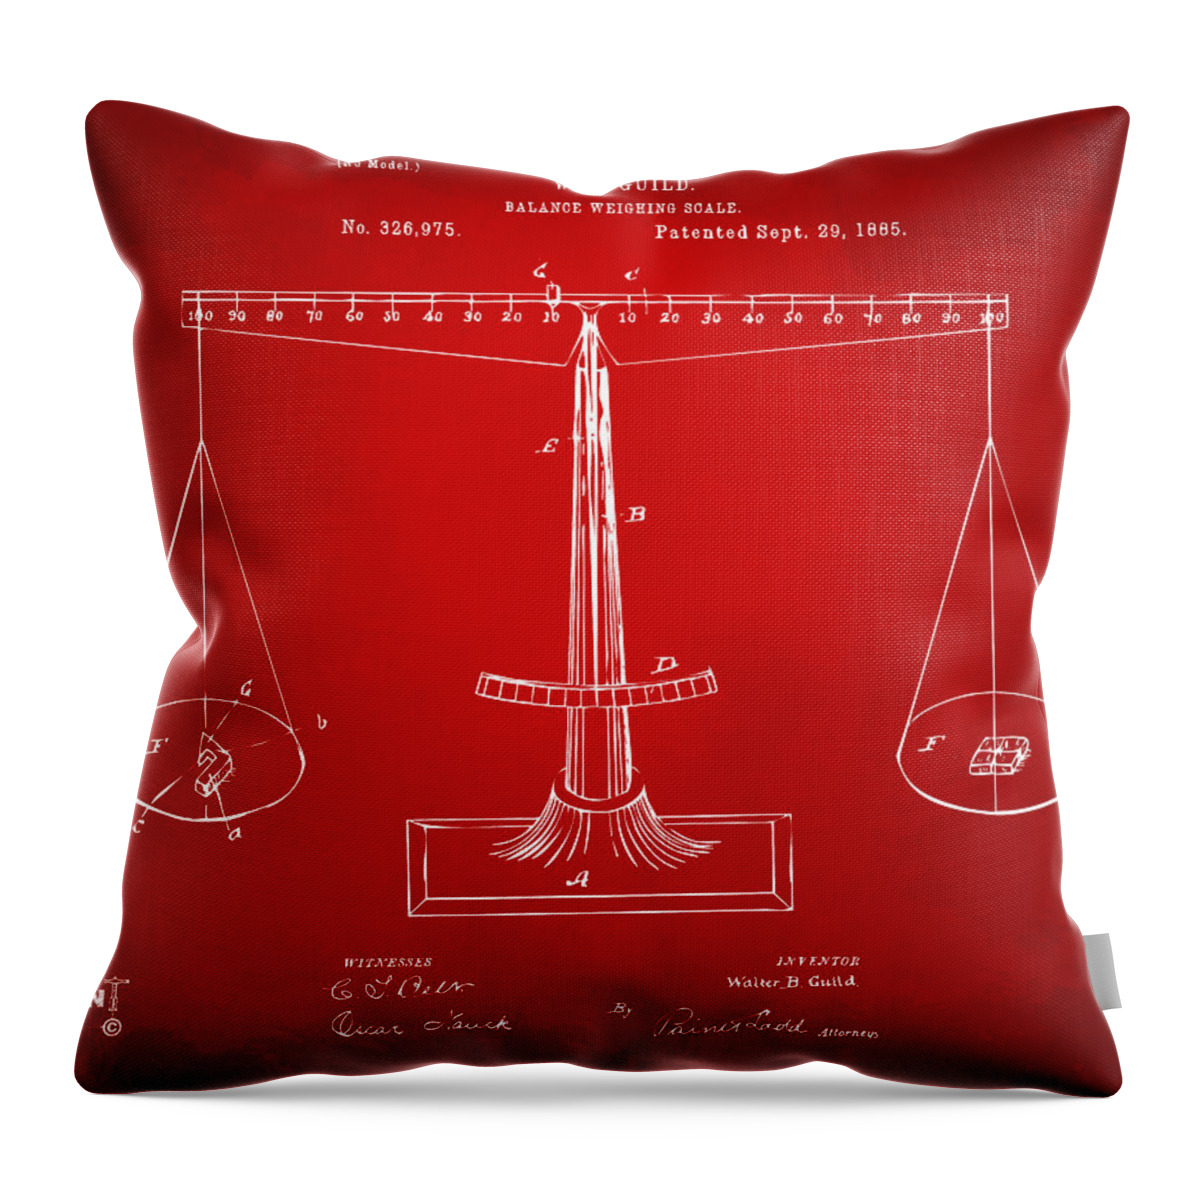 Justice Throw Pillow featuring the digital art 1885 Balance Weighing Scale Patent Artwork Red by Nikki Marie Smith